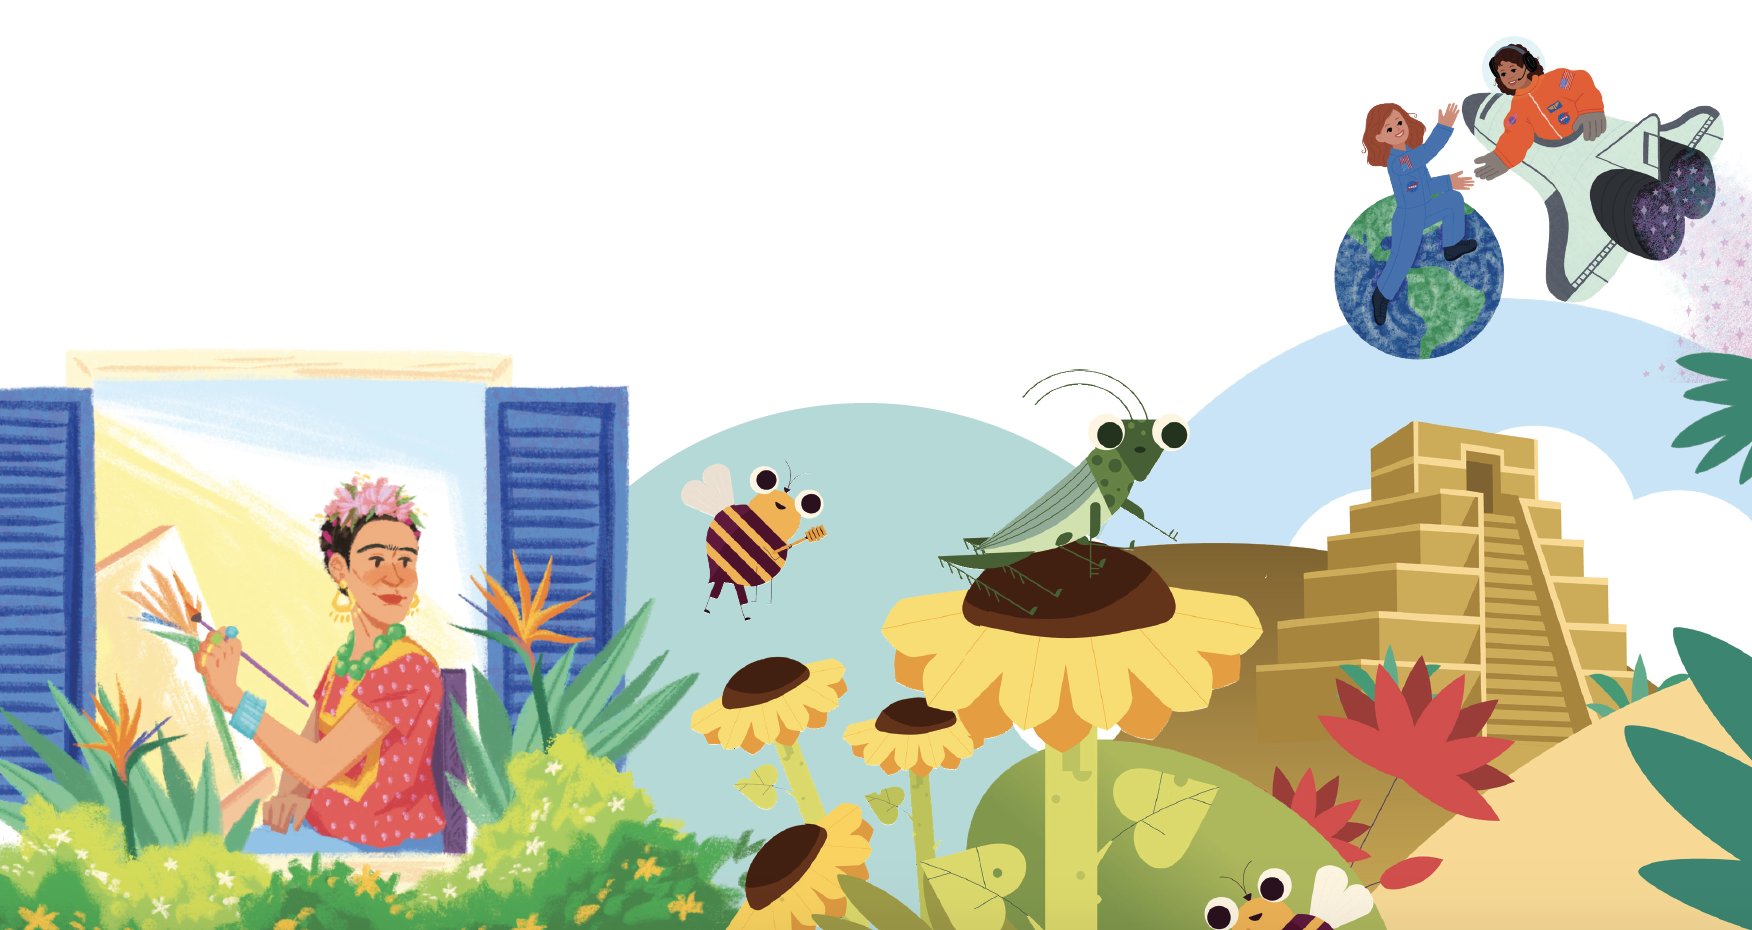 Illustration featuring diverse characters and elements such as frida kahlo with flowers, children on planets, maya pyramid, a bee, and a cricket on nature-themed background.